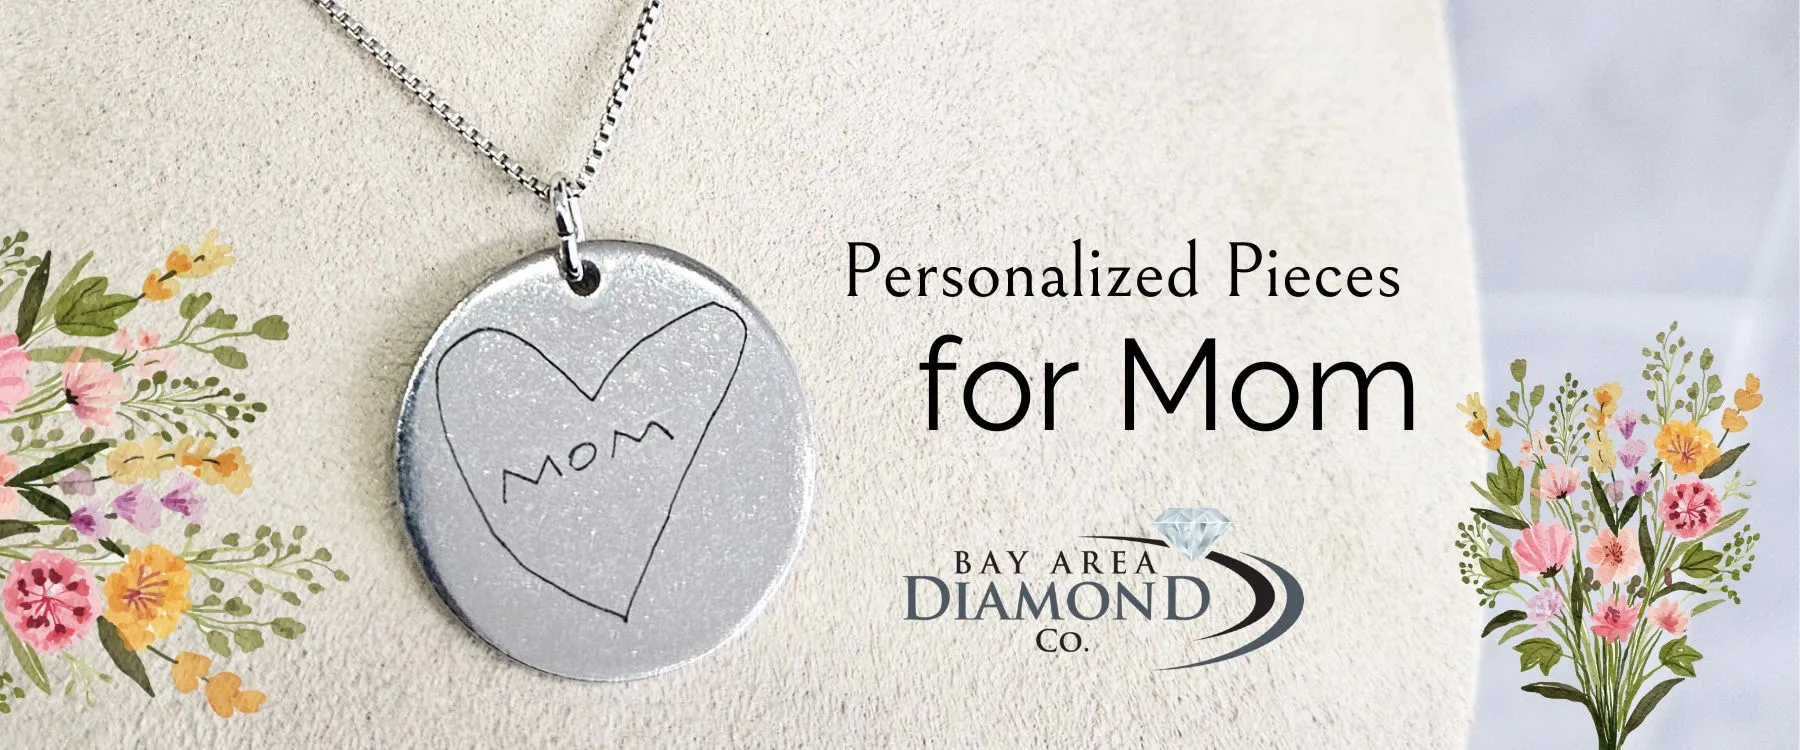 gift a precious moment in time with a laser engraving from Bay Area Diamond Company. Bay Area Diamond Company offers personalize